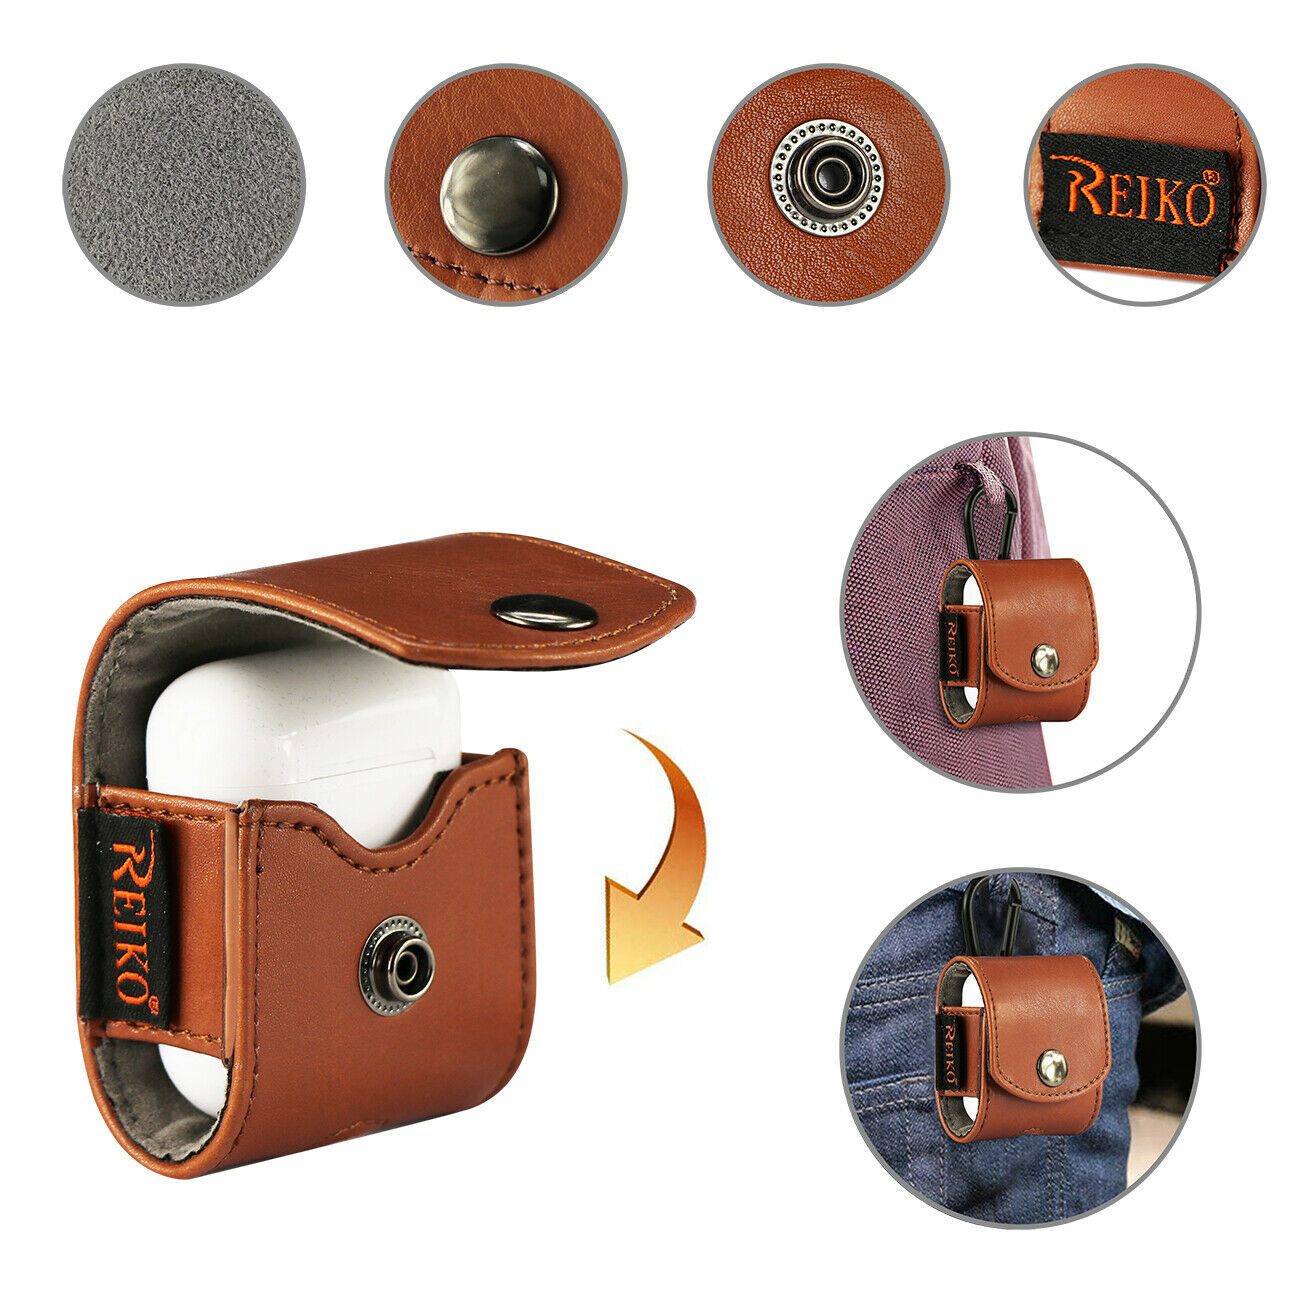 Reiko leather Case for Airpod in Brown - $5.89